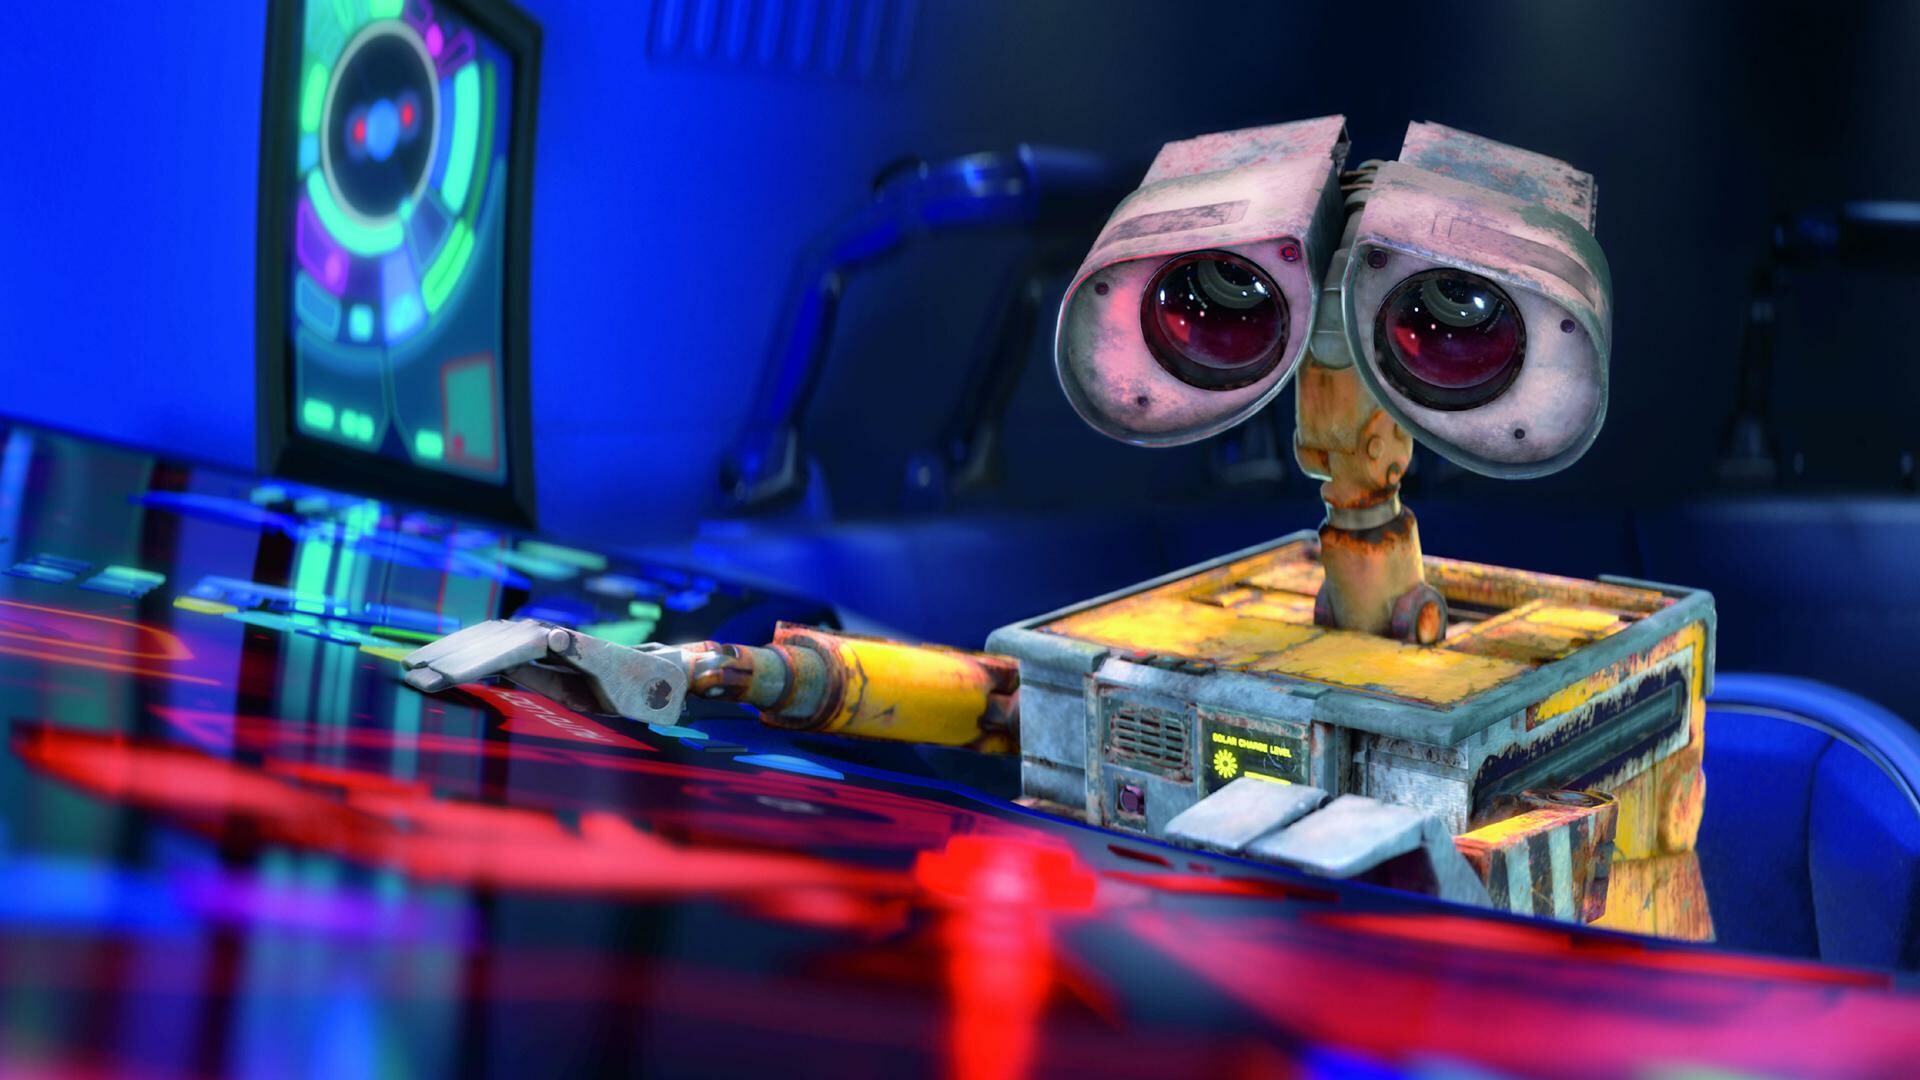 WALL·E: Waste Allocation Load Lifter Earth-class is the last robot left on Earth. 1920x1080 Full HD Wallpaper.